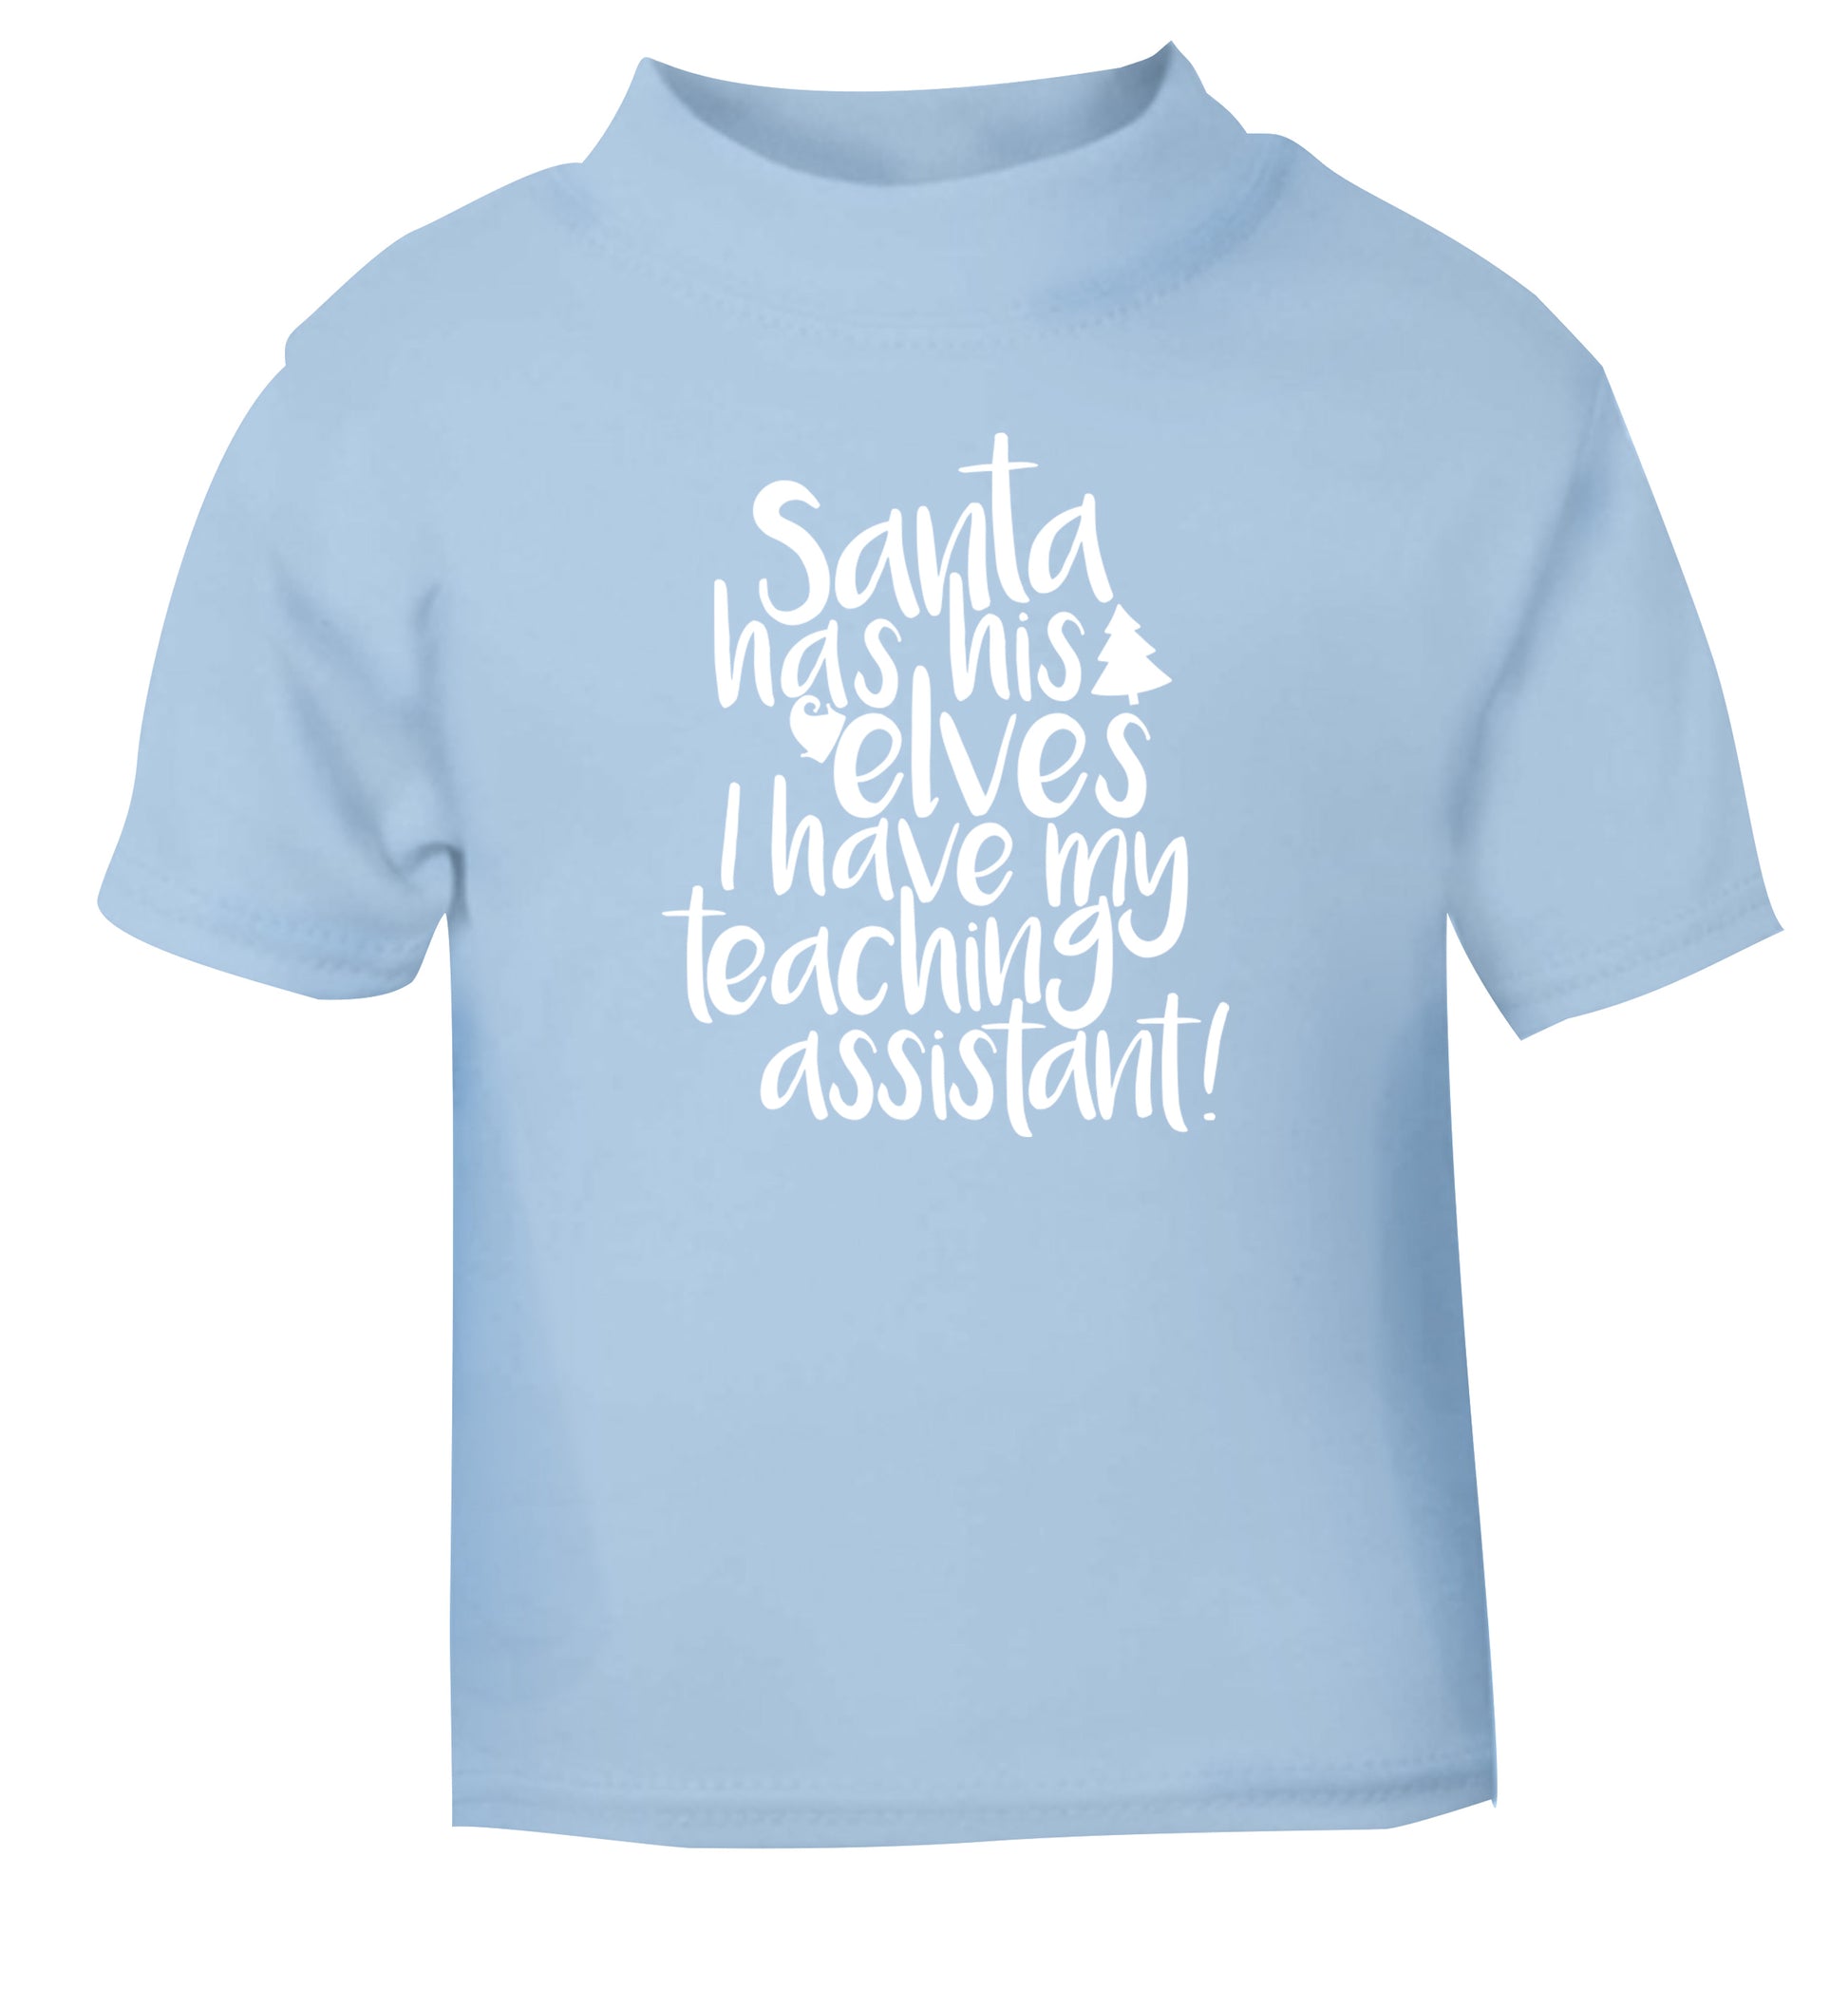 Santa has his elves I have my teaching assistant light blue Baby Toddler Tshirt 2 Years